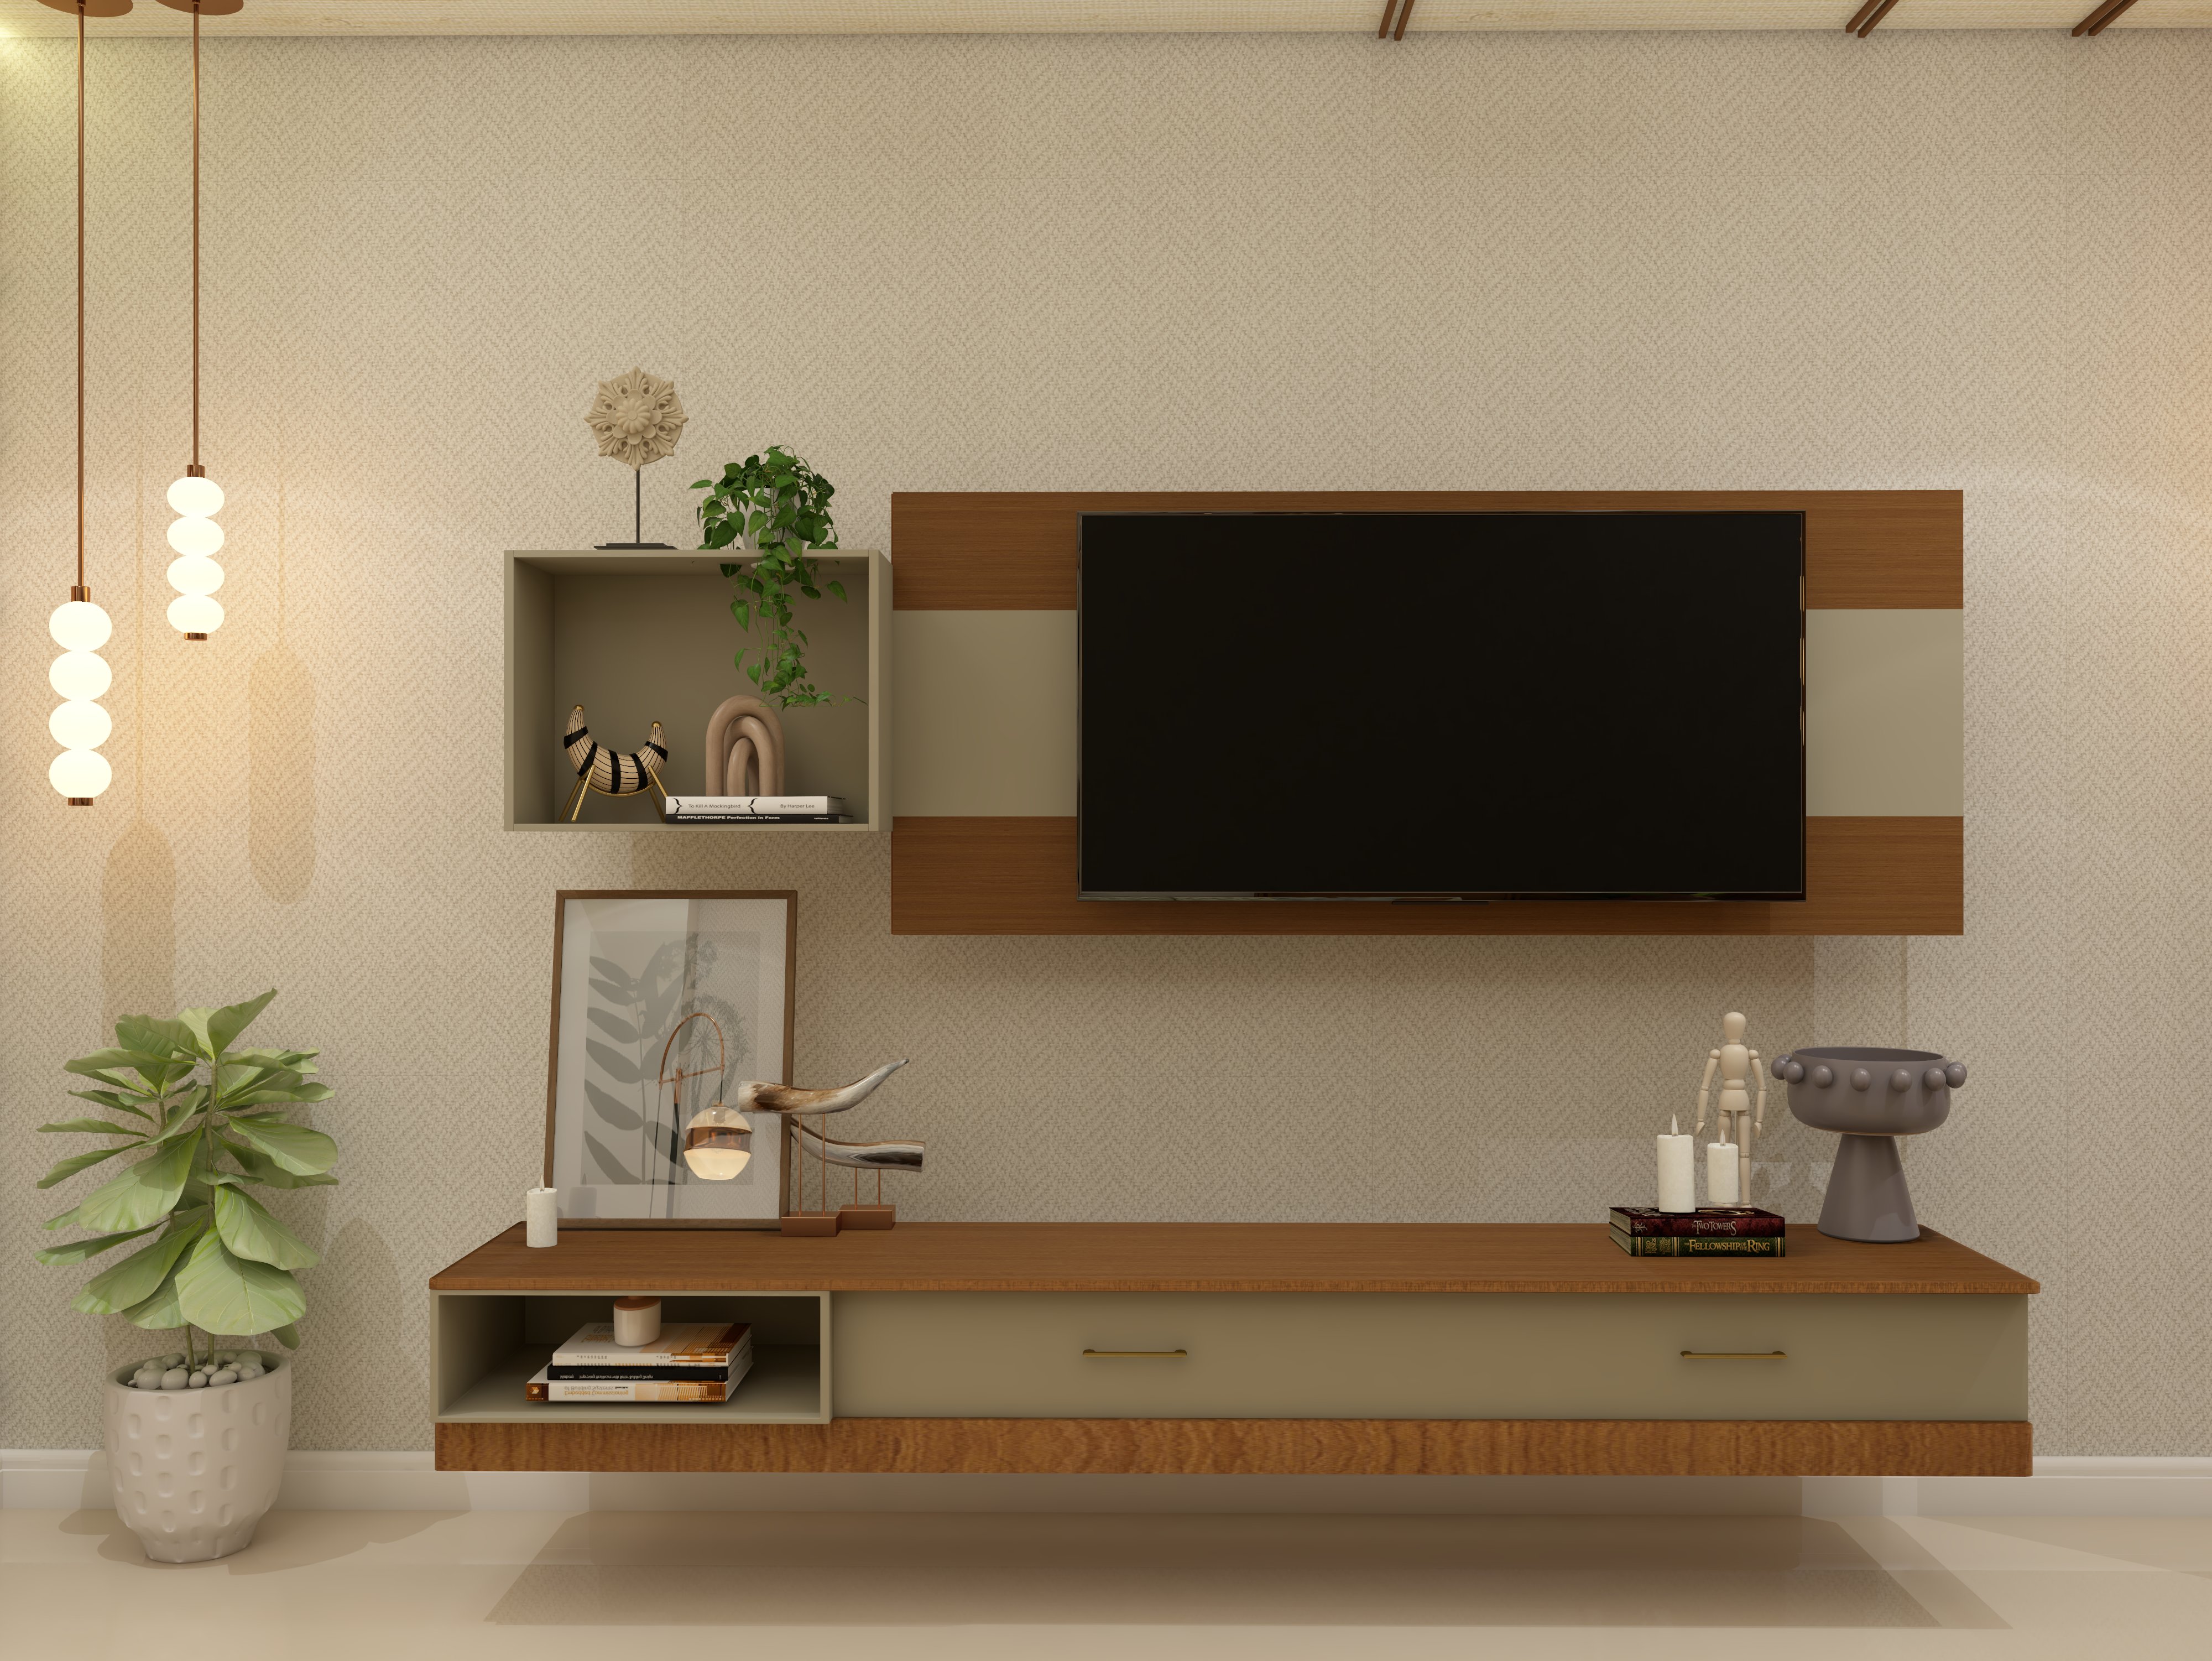 Asian Paints form fitted TV unit with textured wallpaper - Beautiful Homes